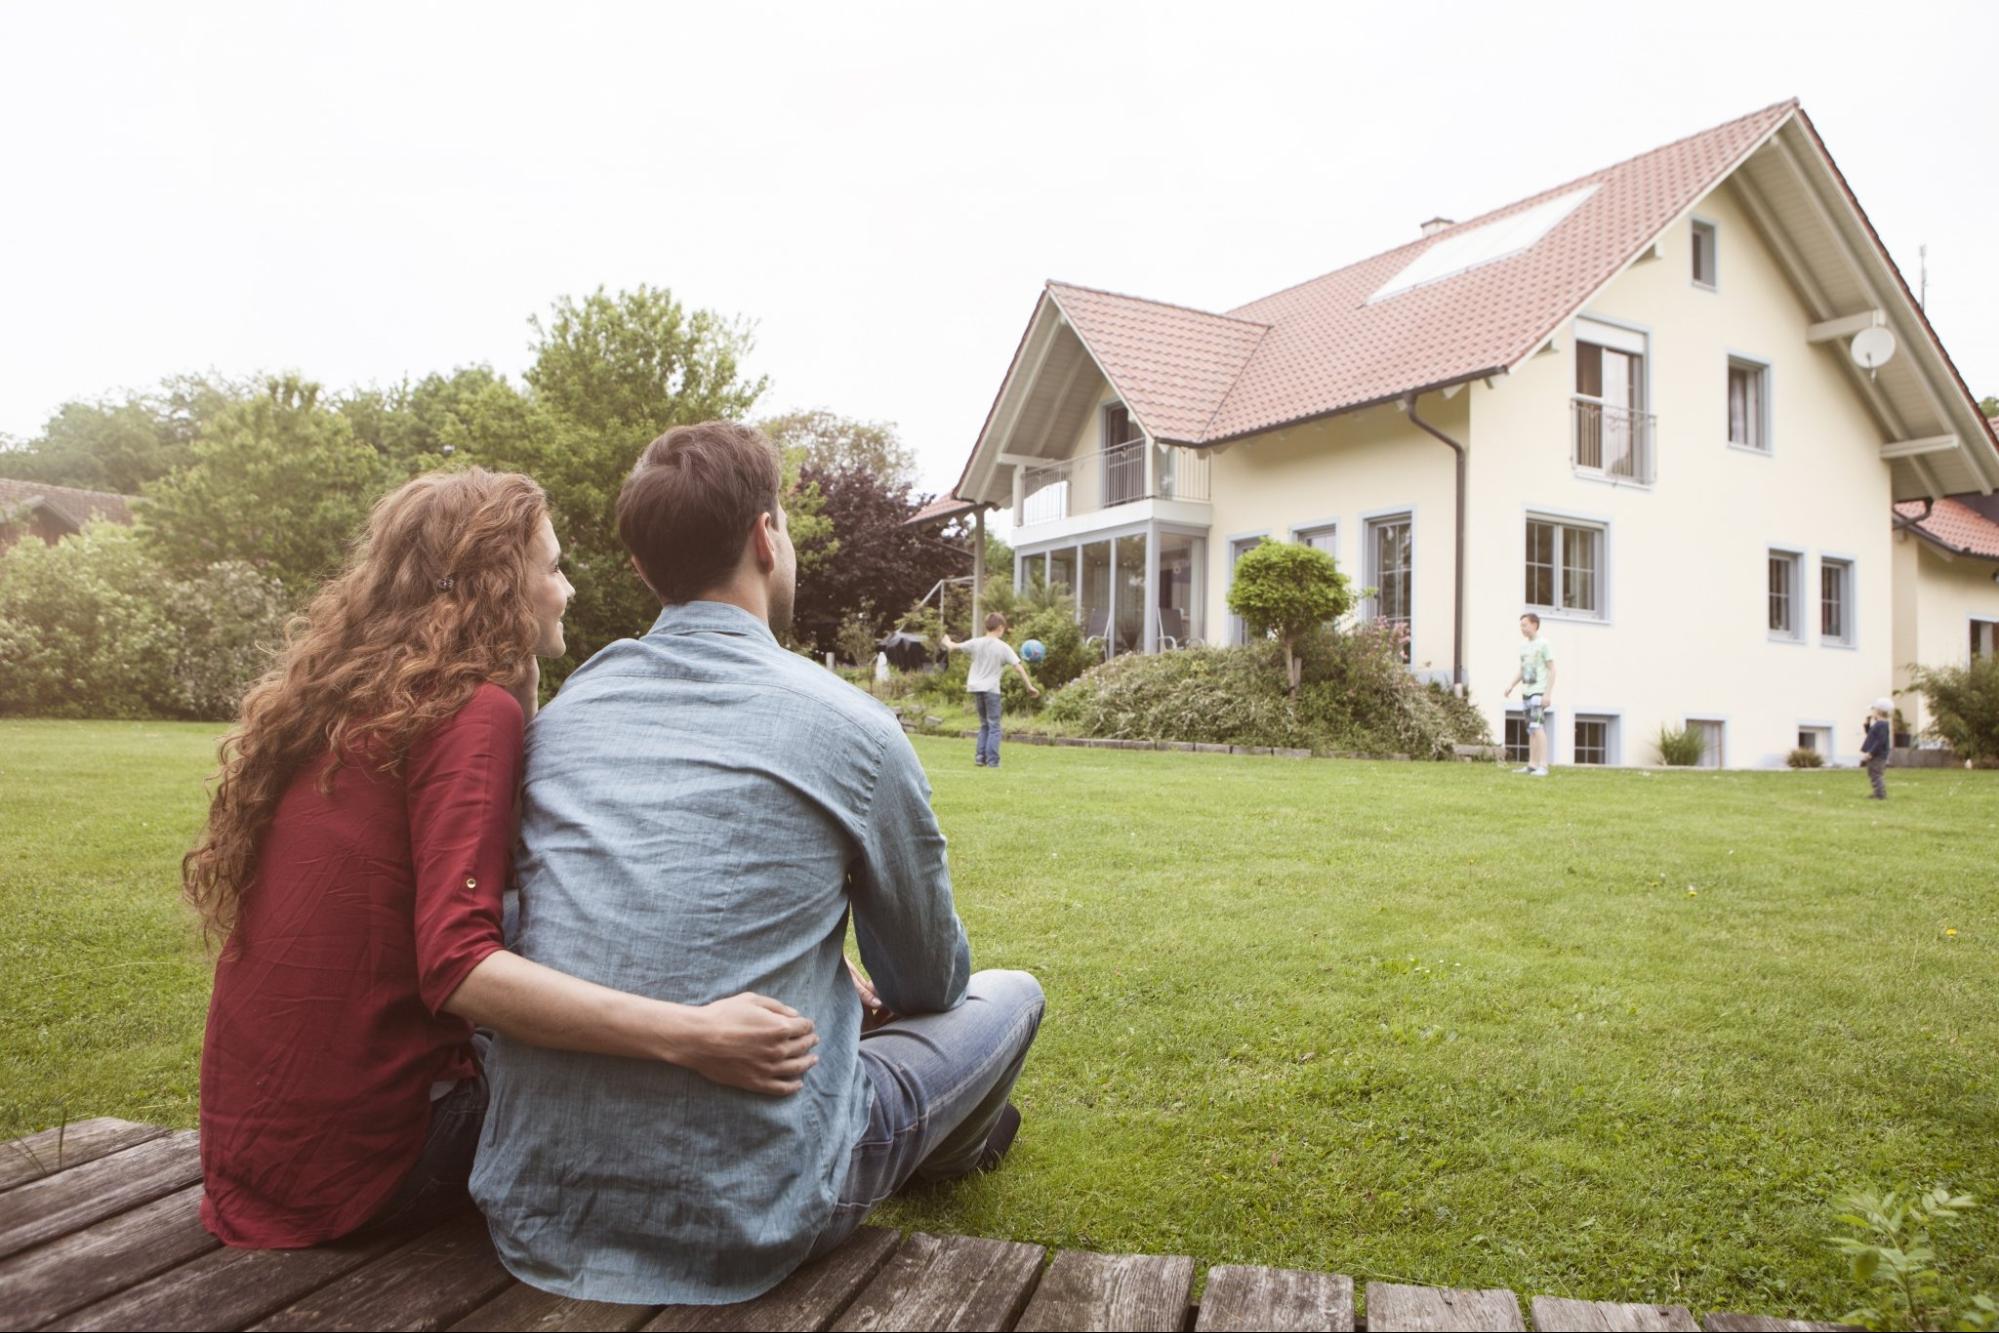 Renting or buying a country house - which is more profitable?